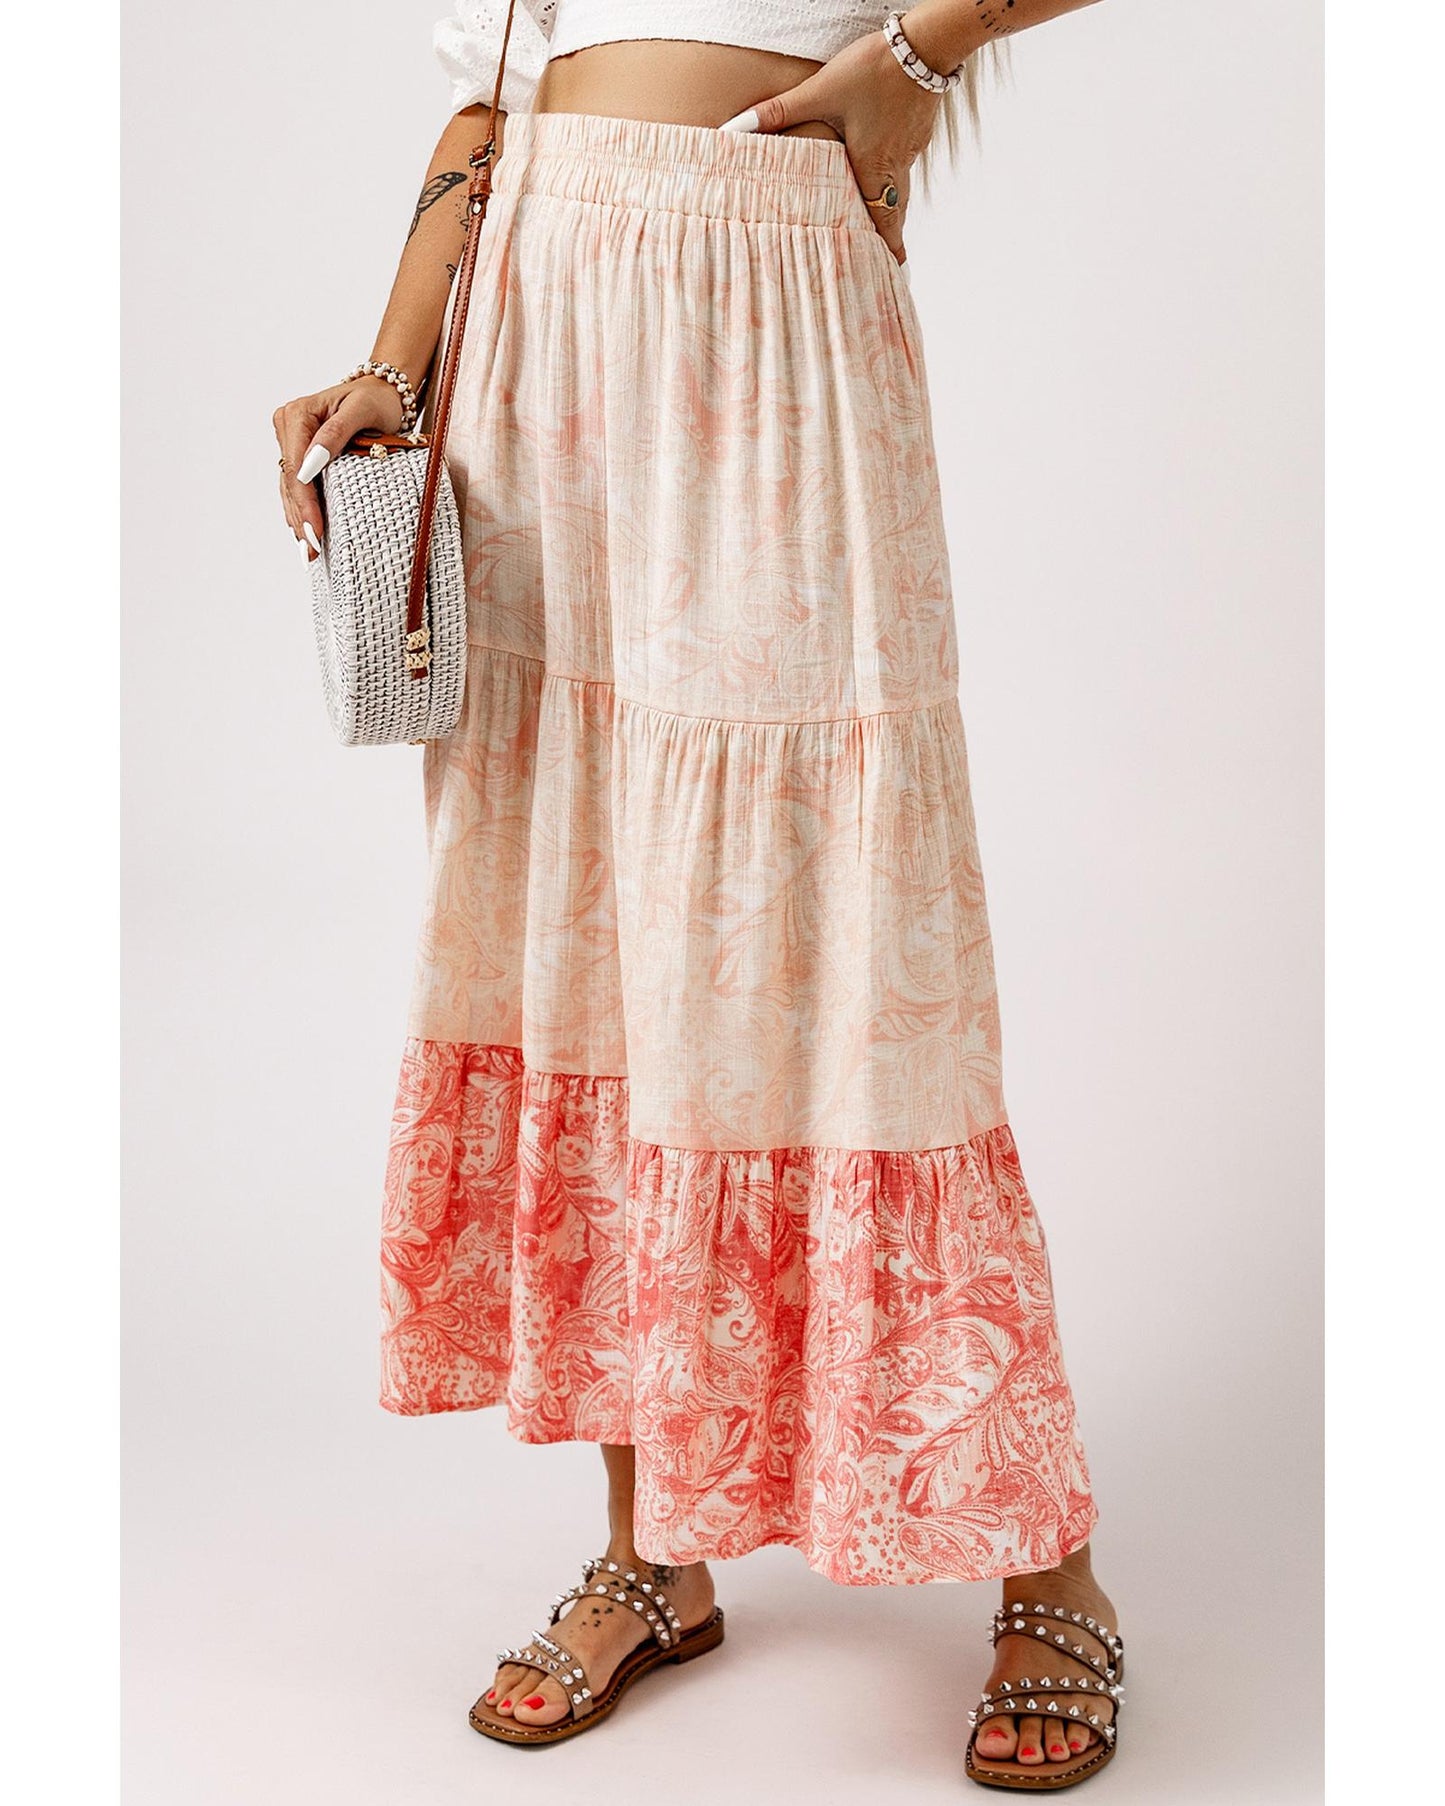 Azura Exchange Tiered Maxi Skirt with Floral Print - M